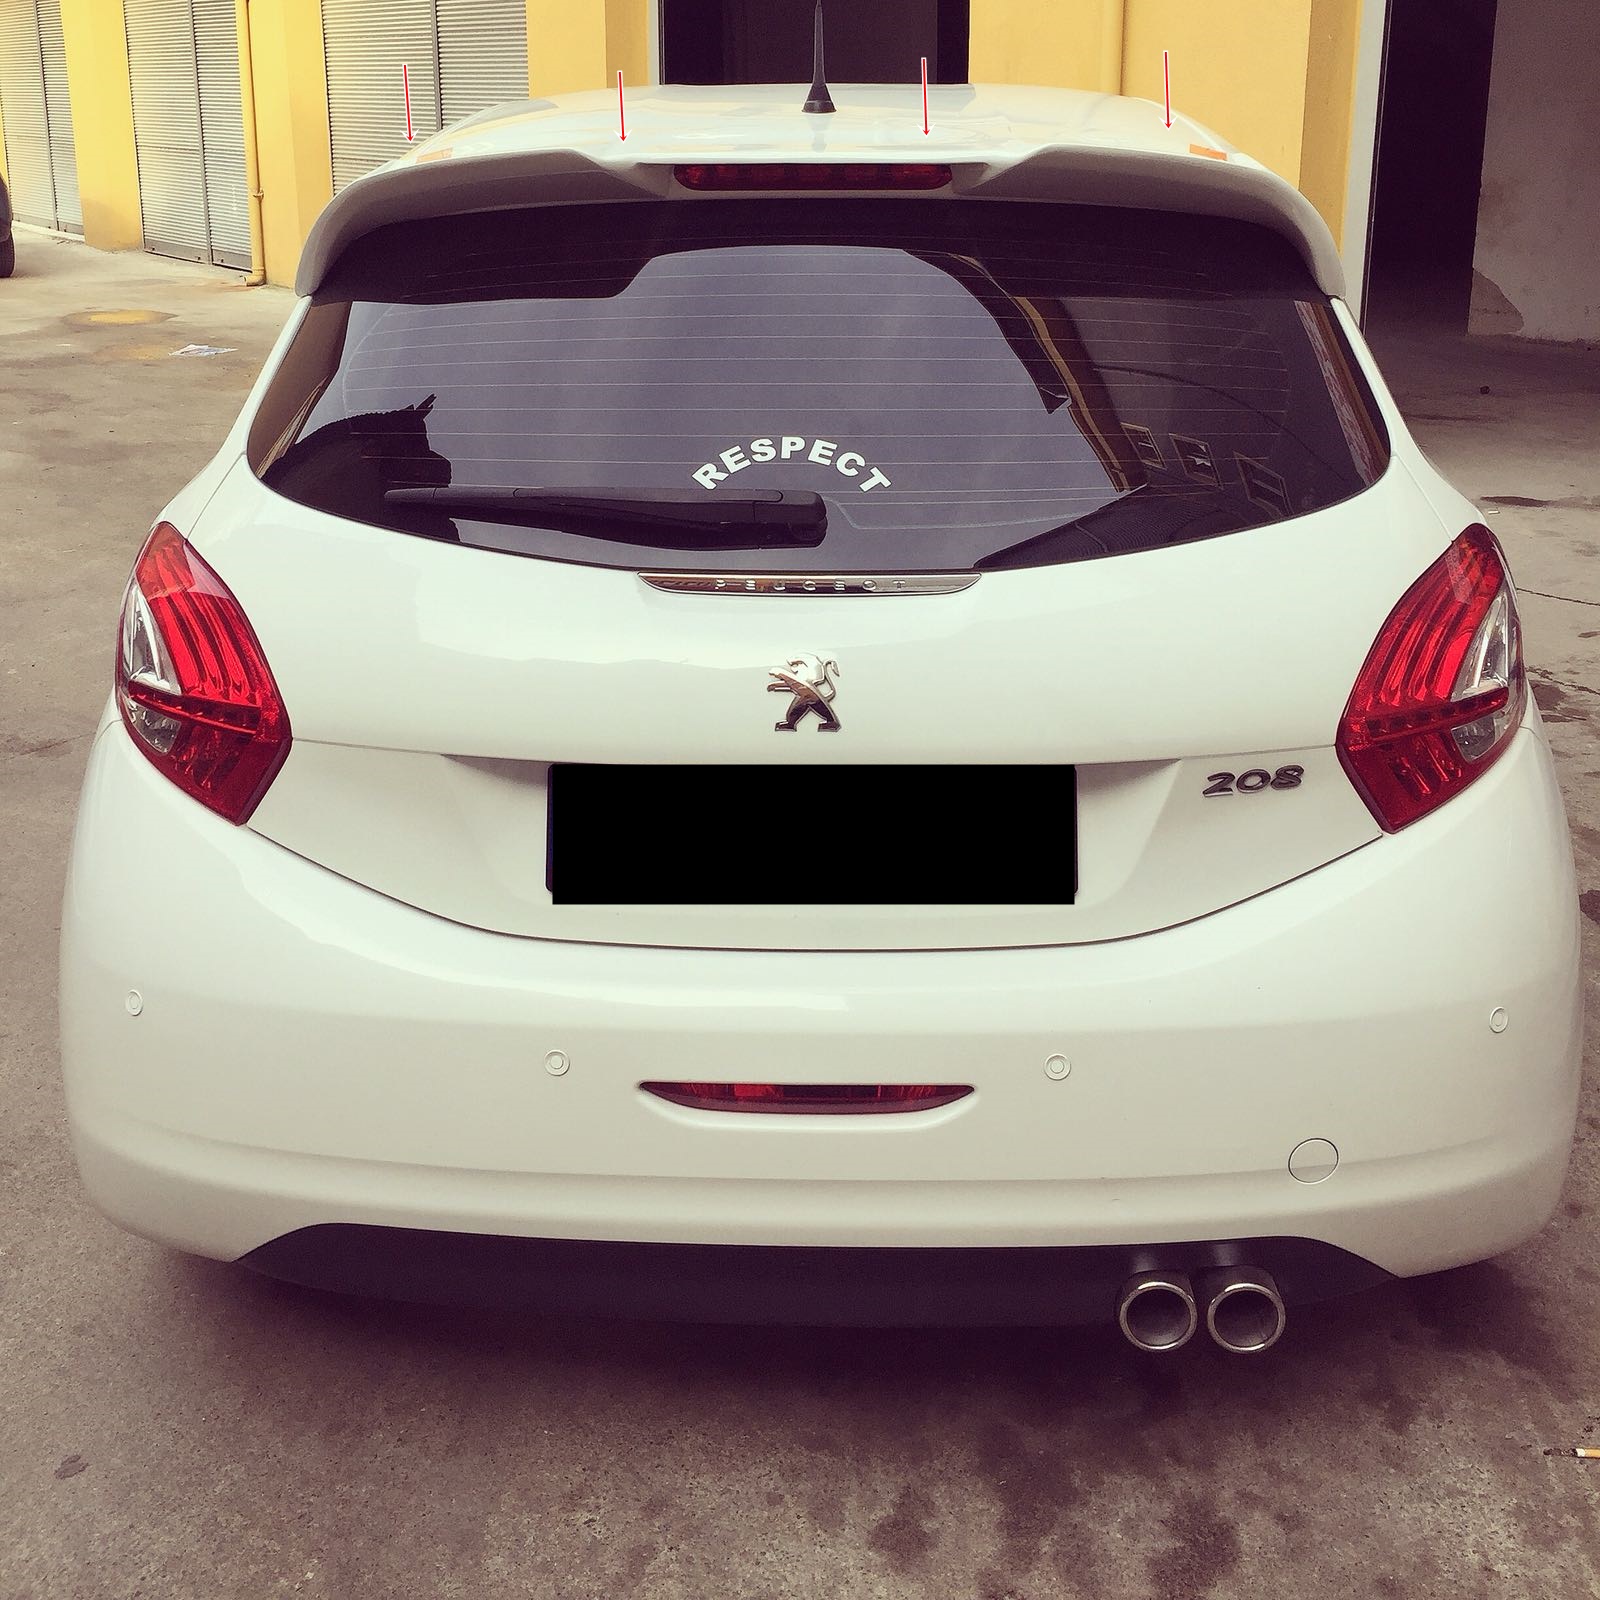 PEUGEOT 208 Model Spoiler Piano Black and White Universal Luggage